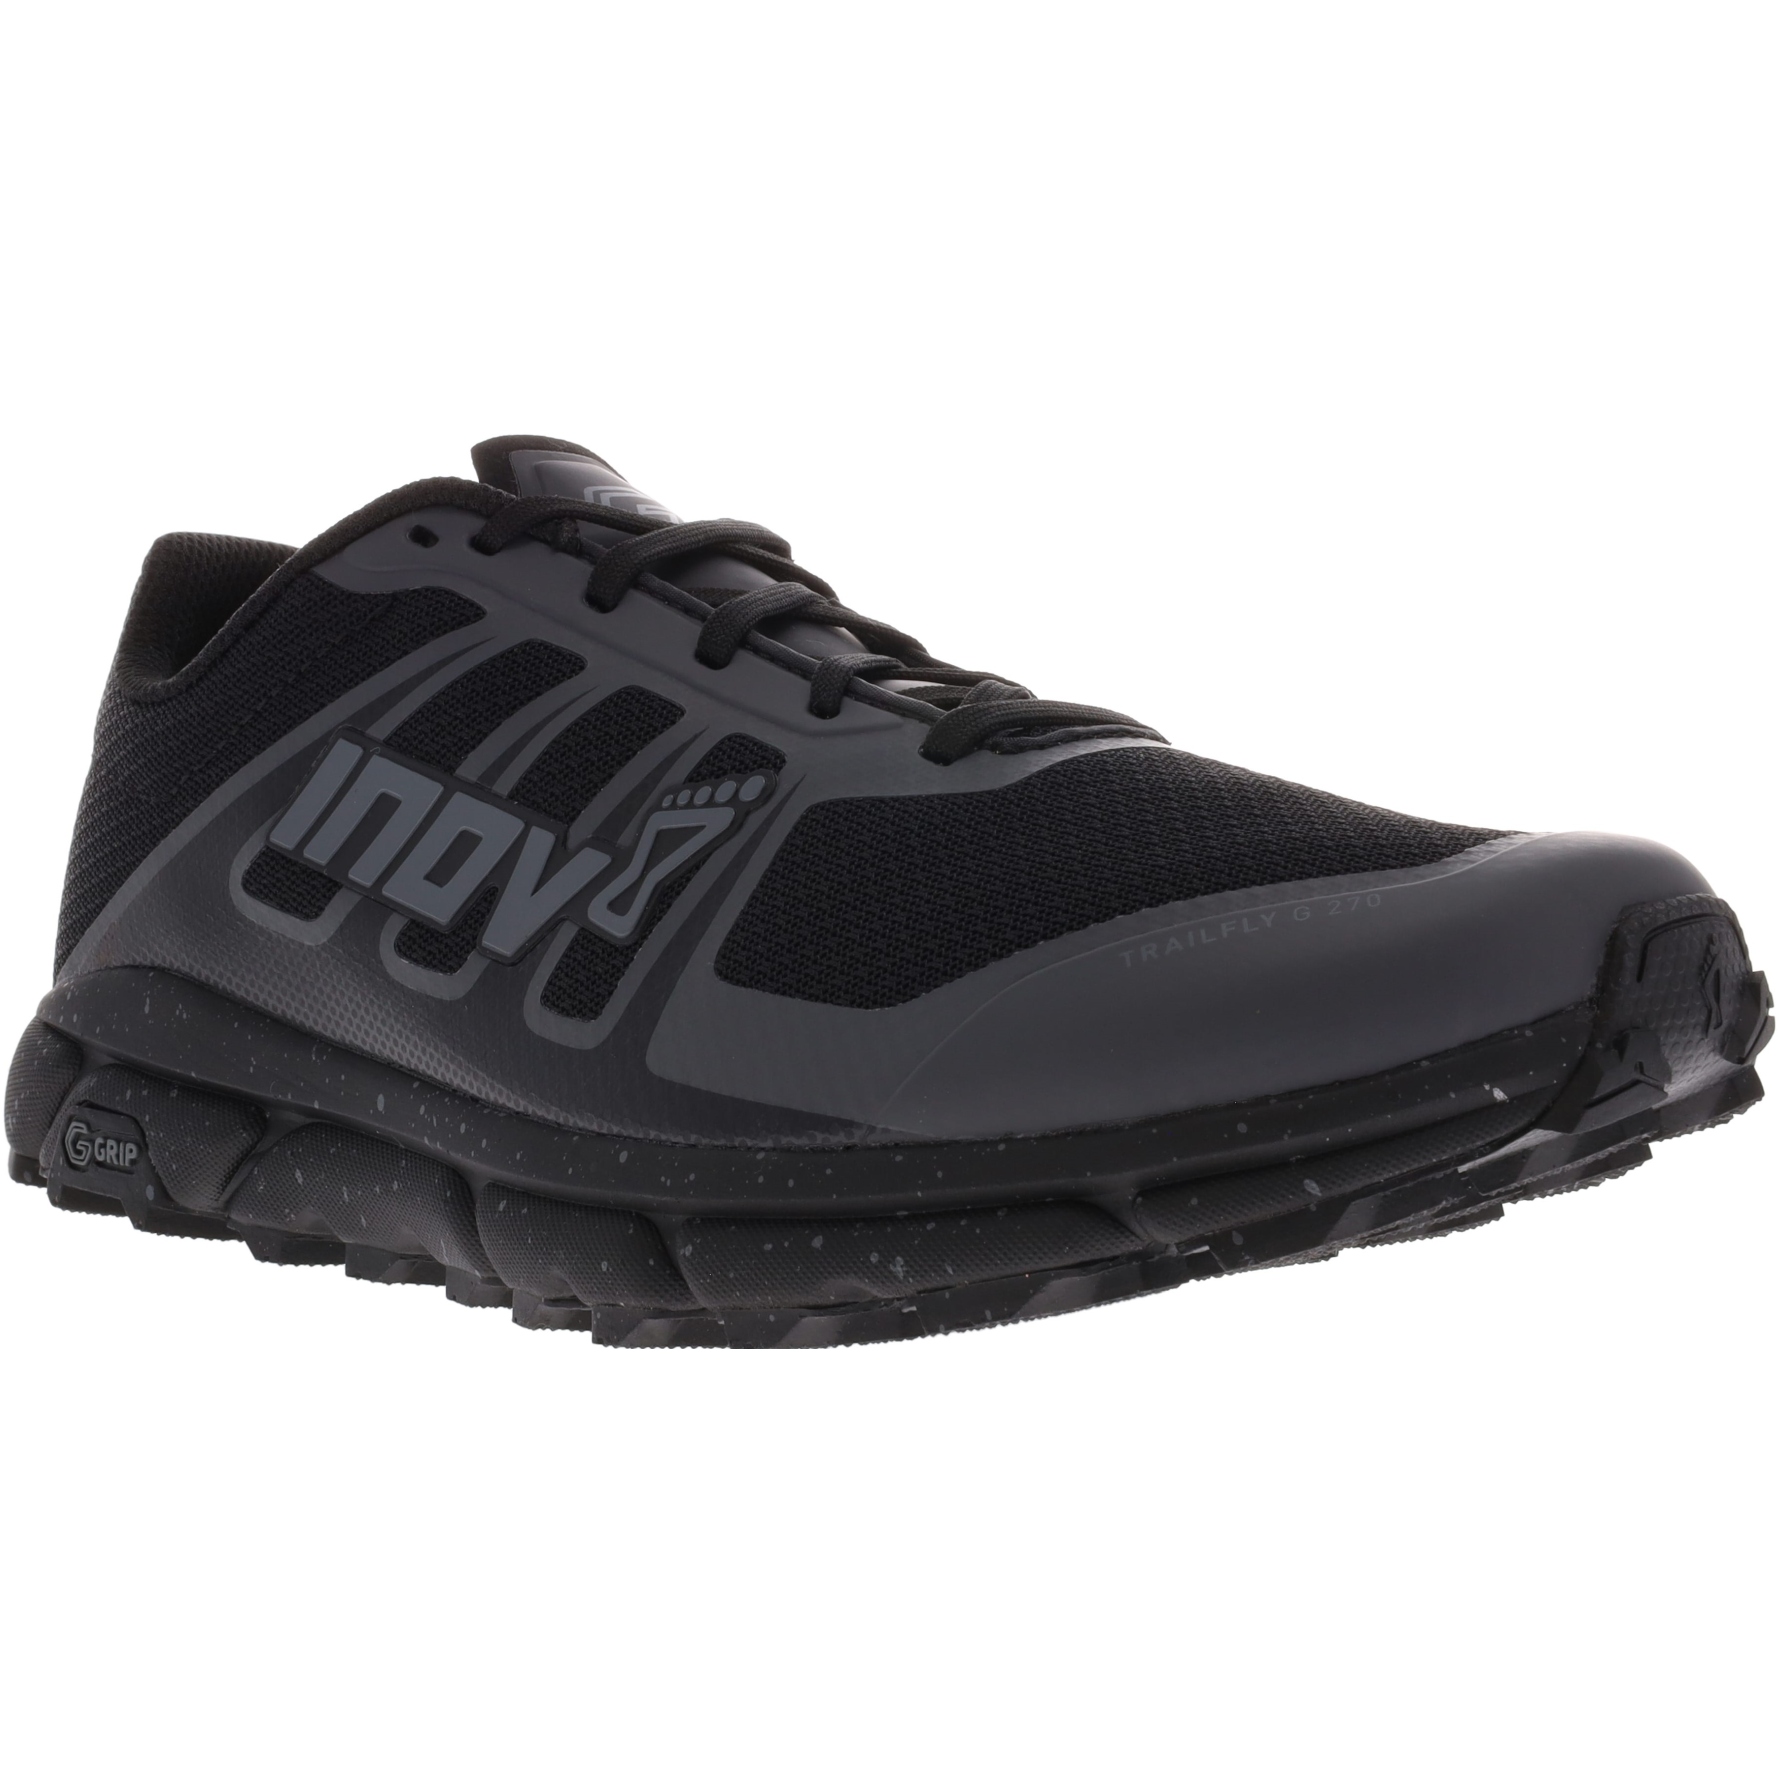 Picture of Inov-8 TrailFly G 270 V2 Wide Running Shoes - graphite/black